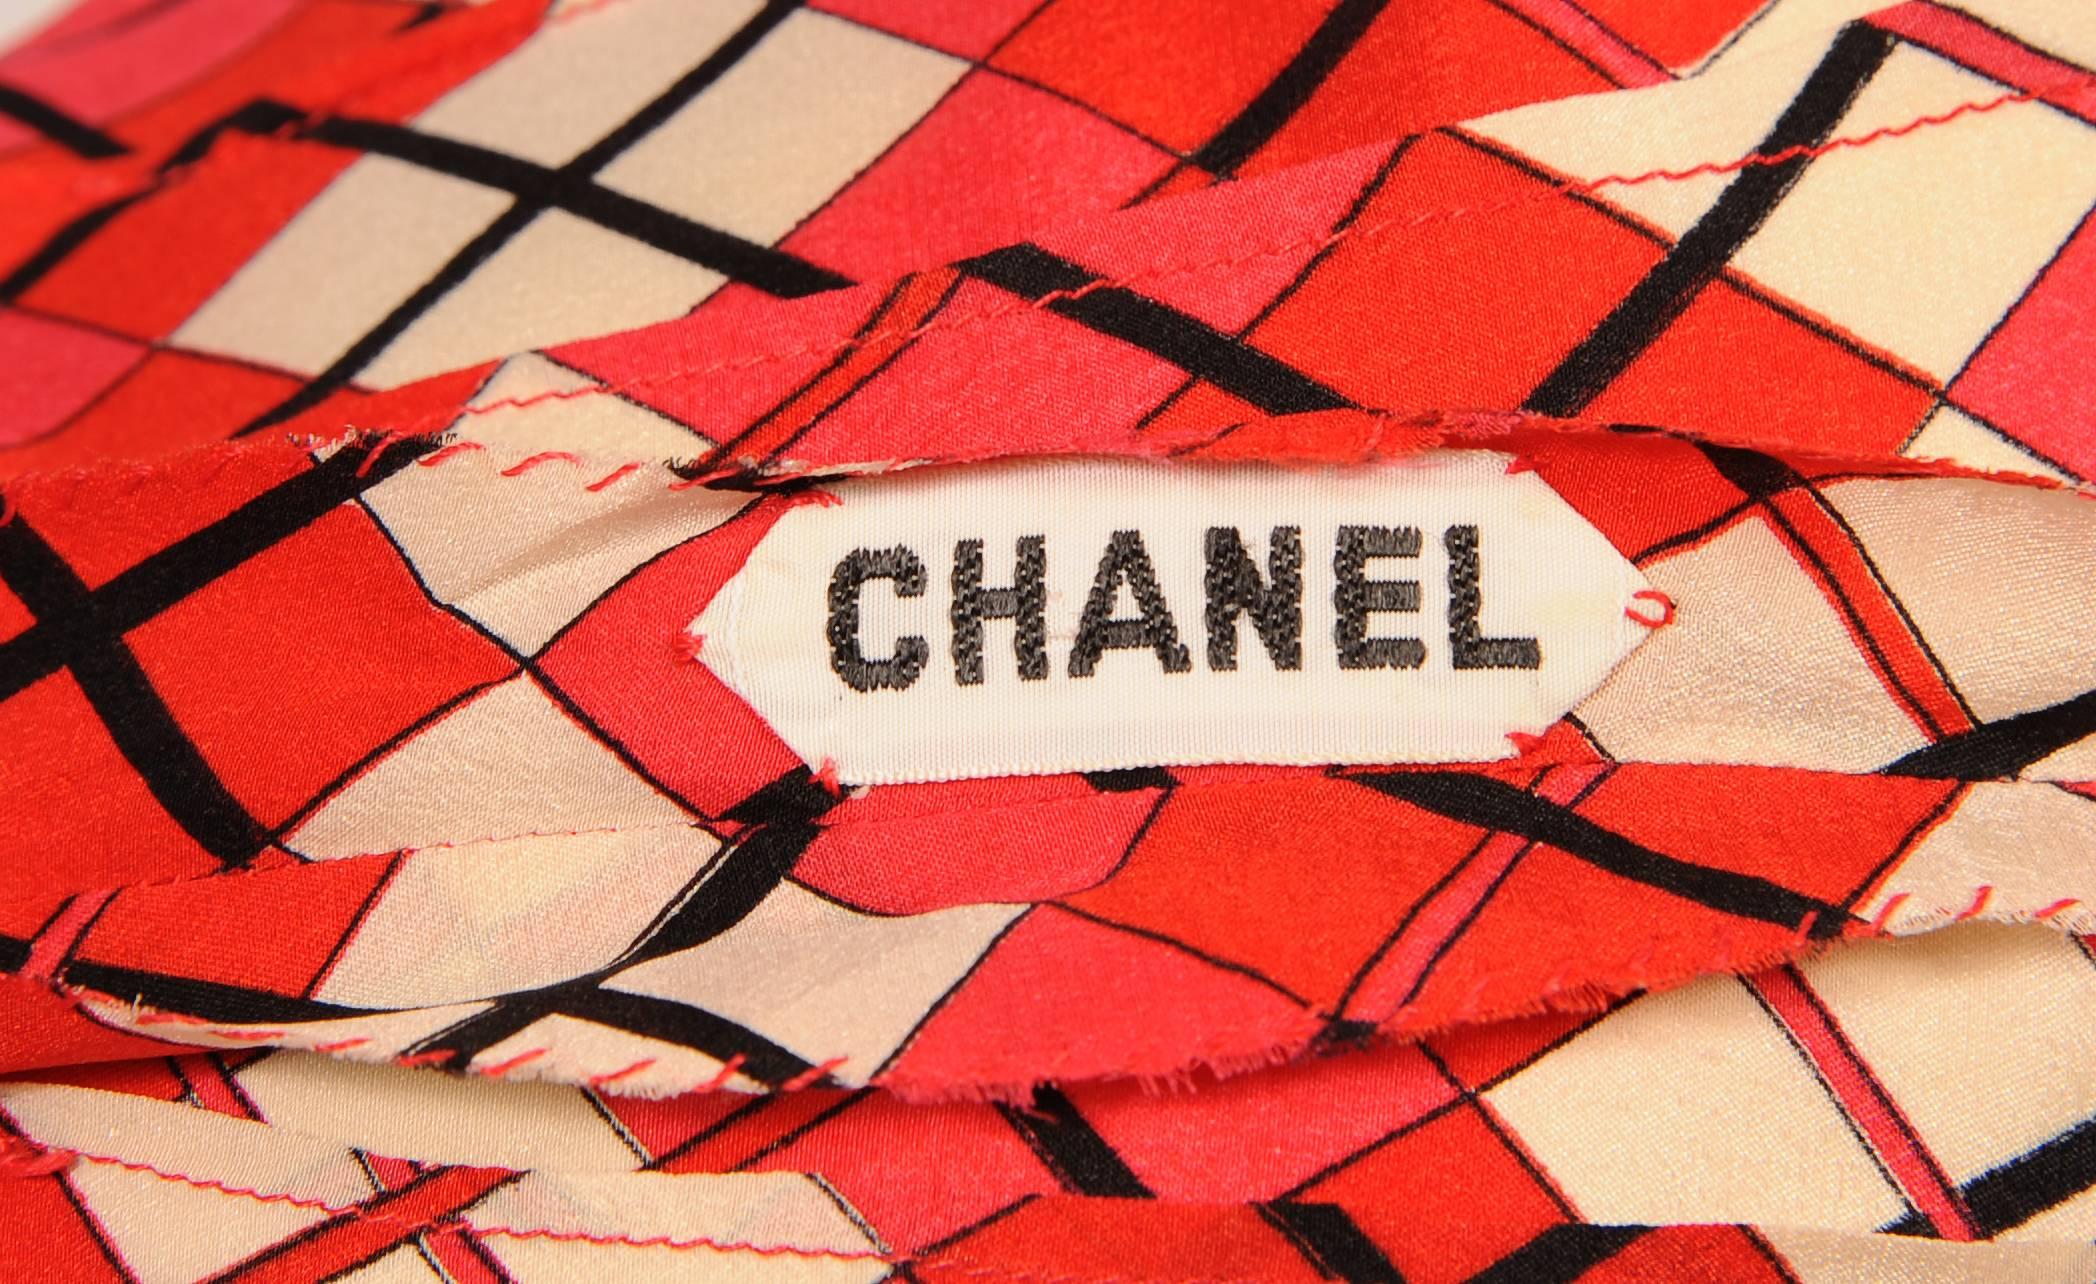 Women's Chanel Numbered Haute Couture Colorful Patterned Silk Blouse, Larger Size